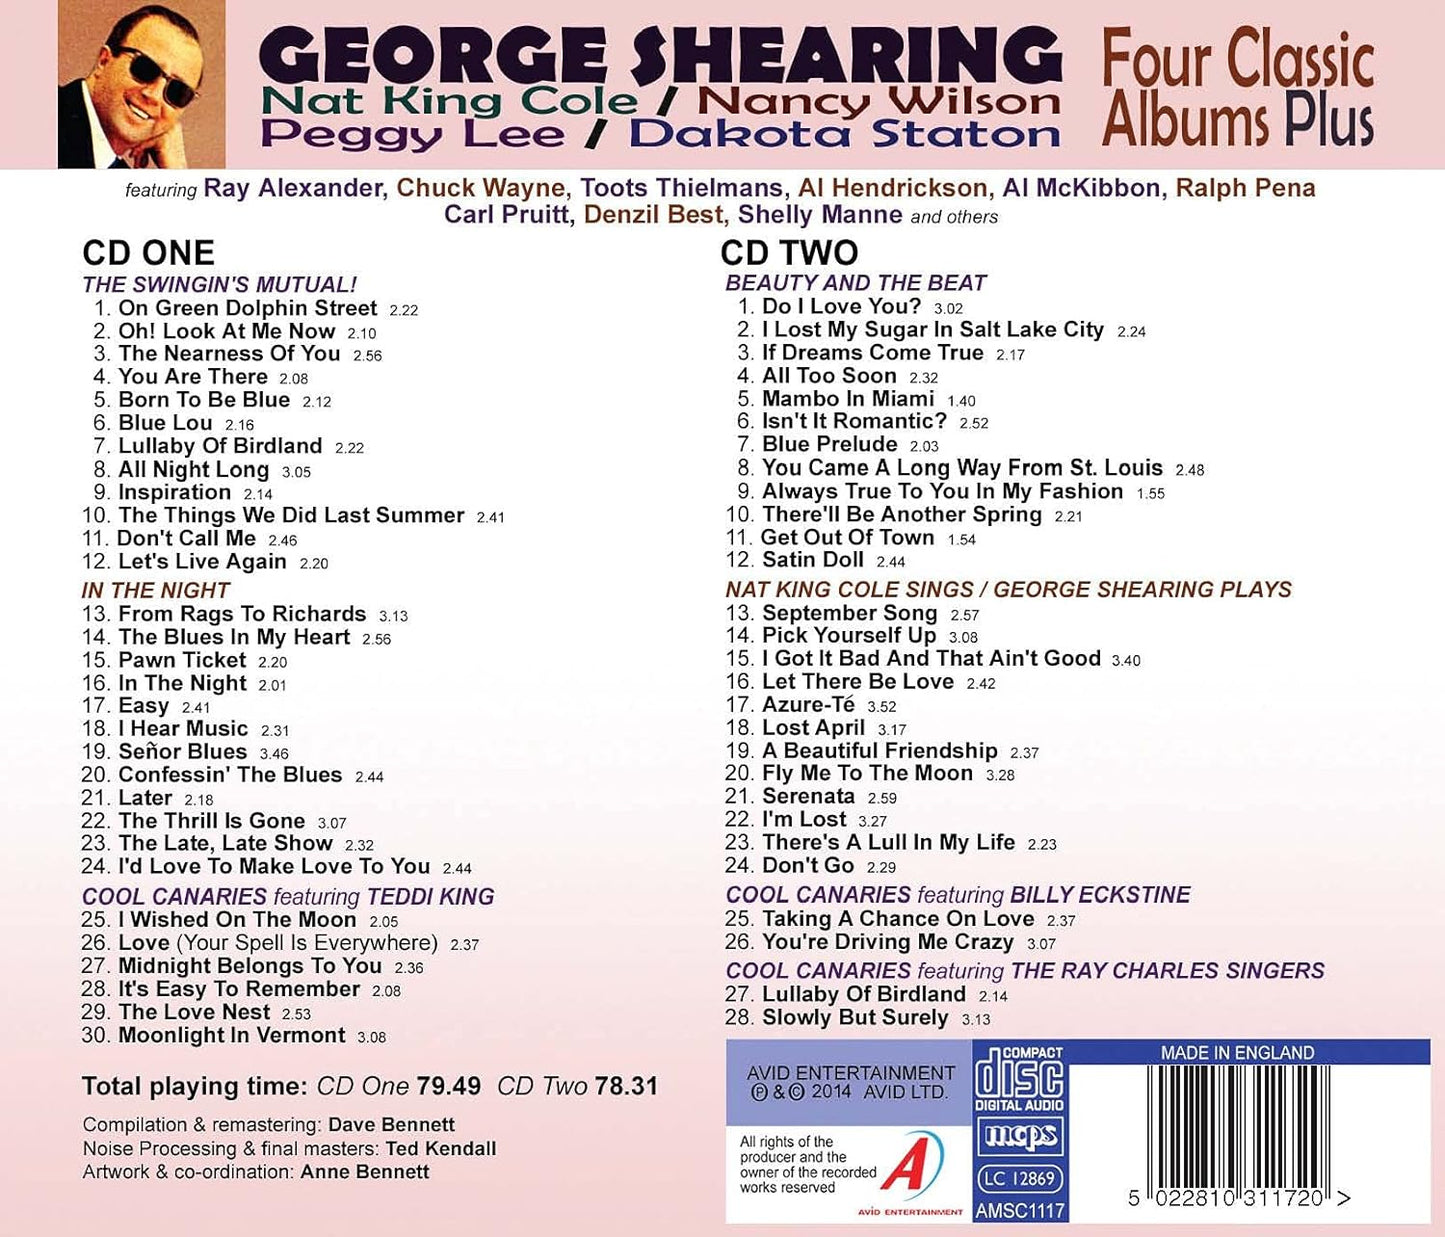 GEORGE SHEARING - Four Classic Albums Plus (2 CDs)